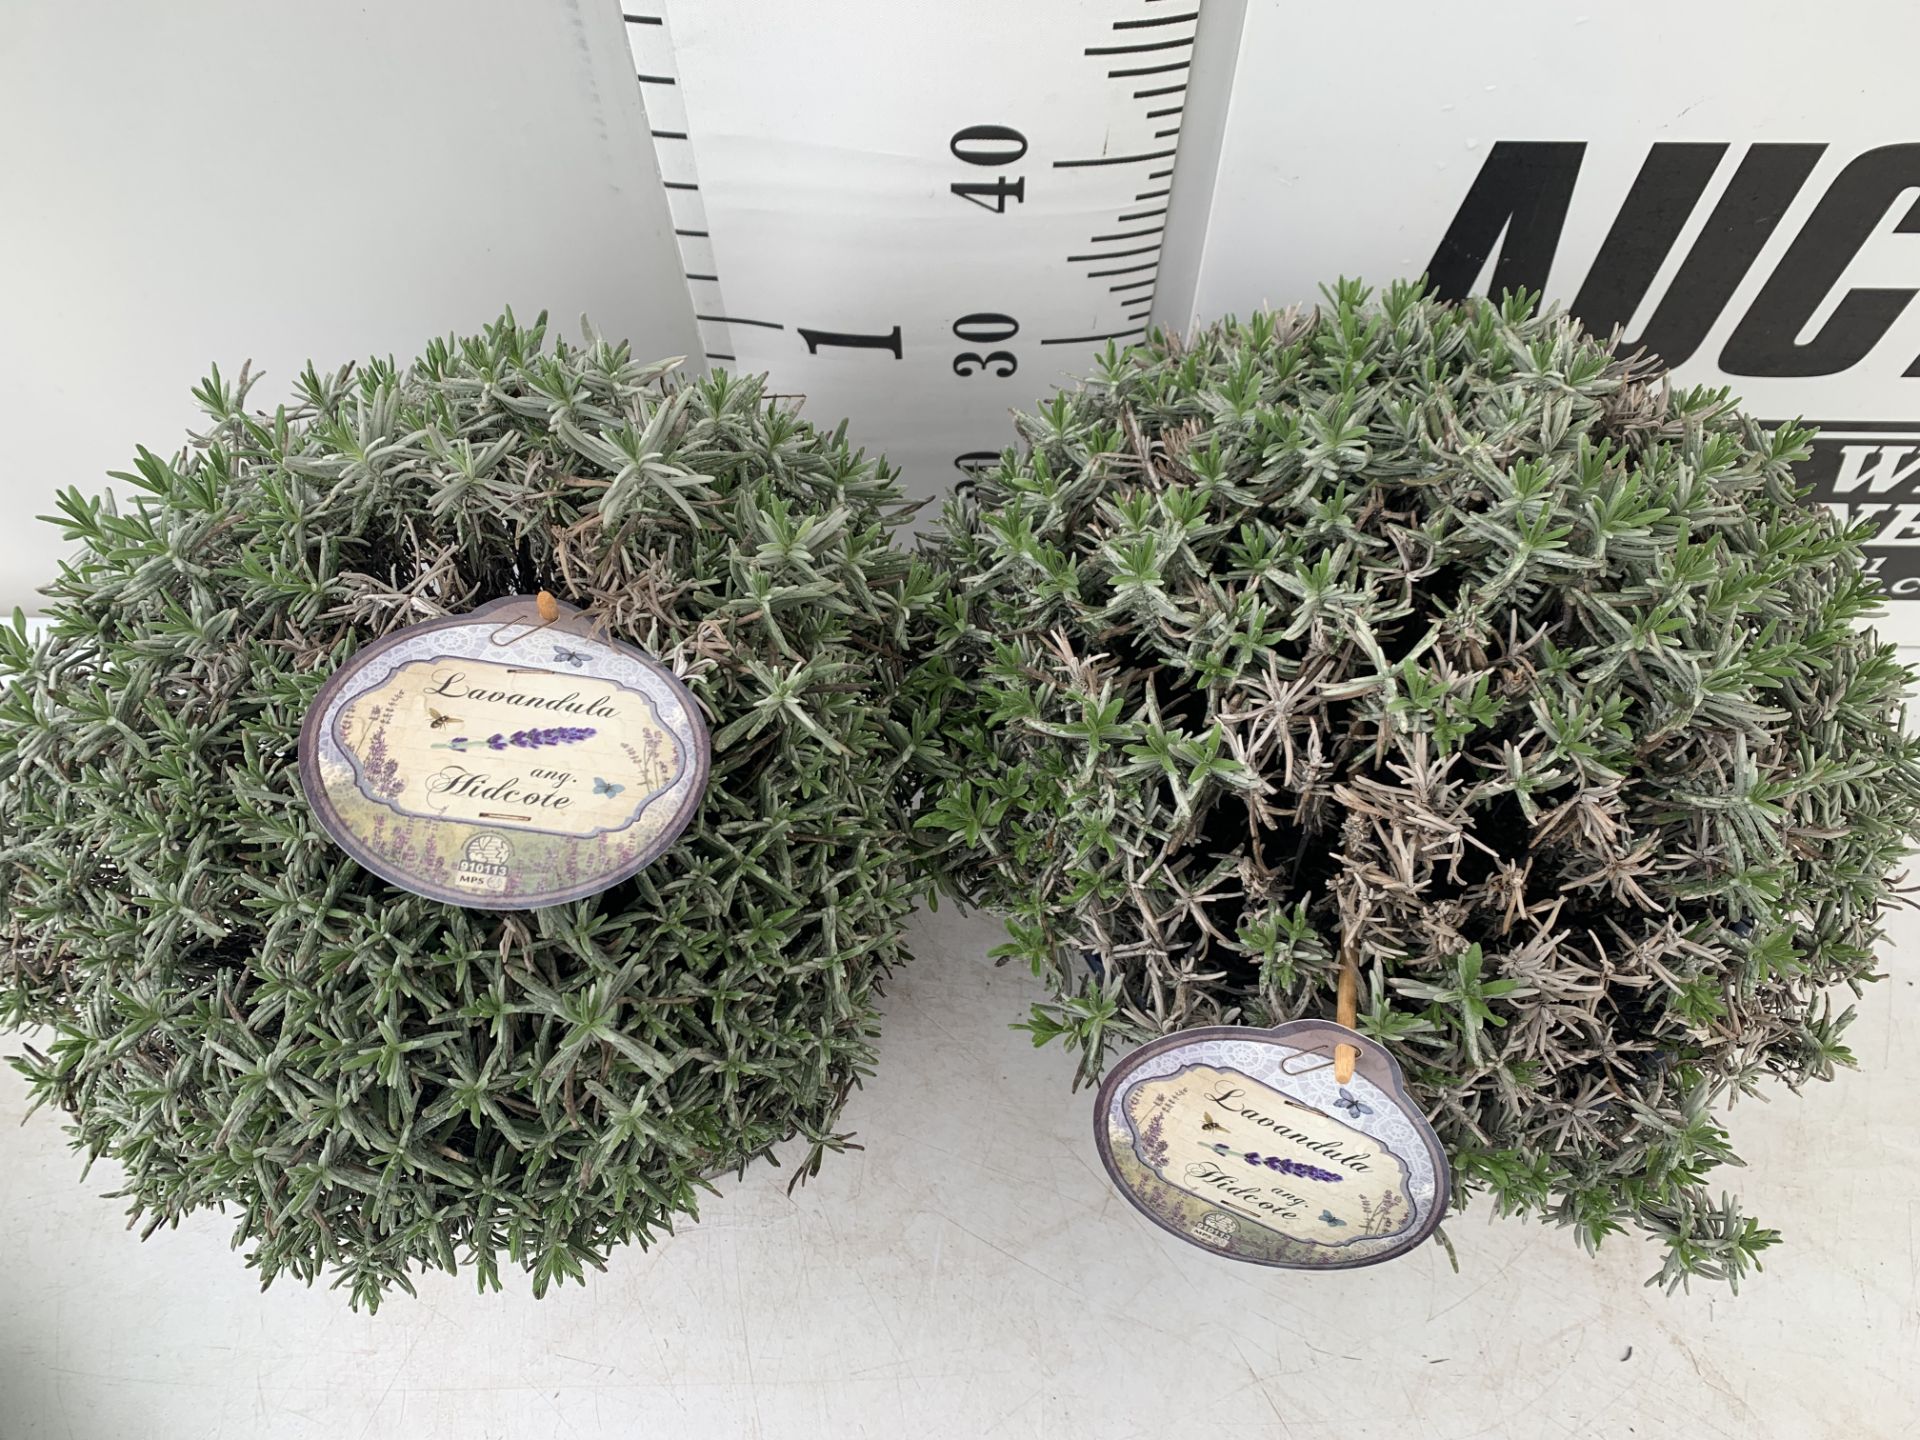 TWO LAVENDER 'HIDCOTE' IN 5 LTR POTS APPROX 40CM IN HEIGHT IN 5 LTR POTS TO BE SOLD FOR THE TWO - Image 3 of 8